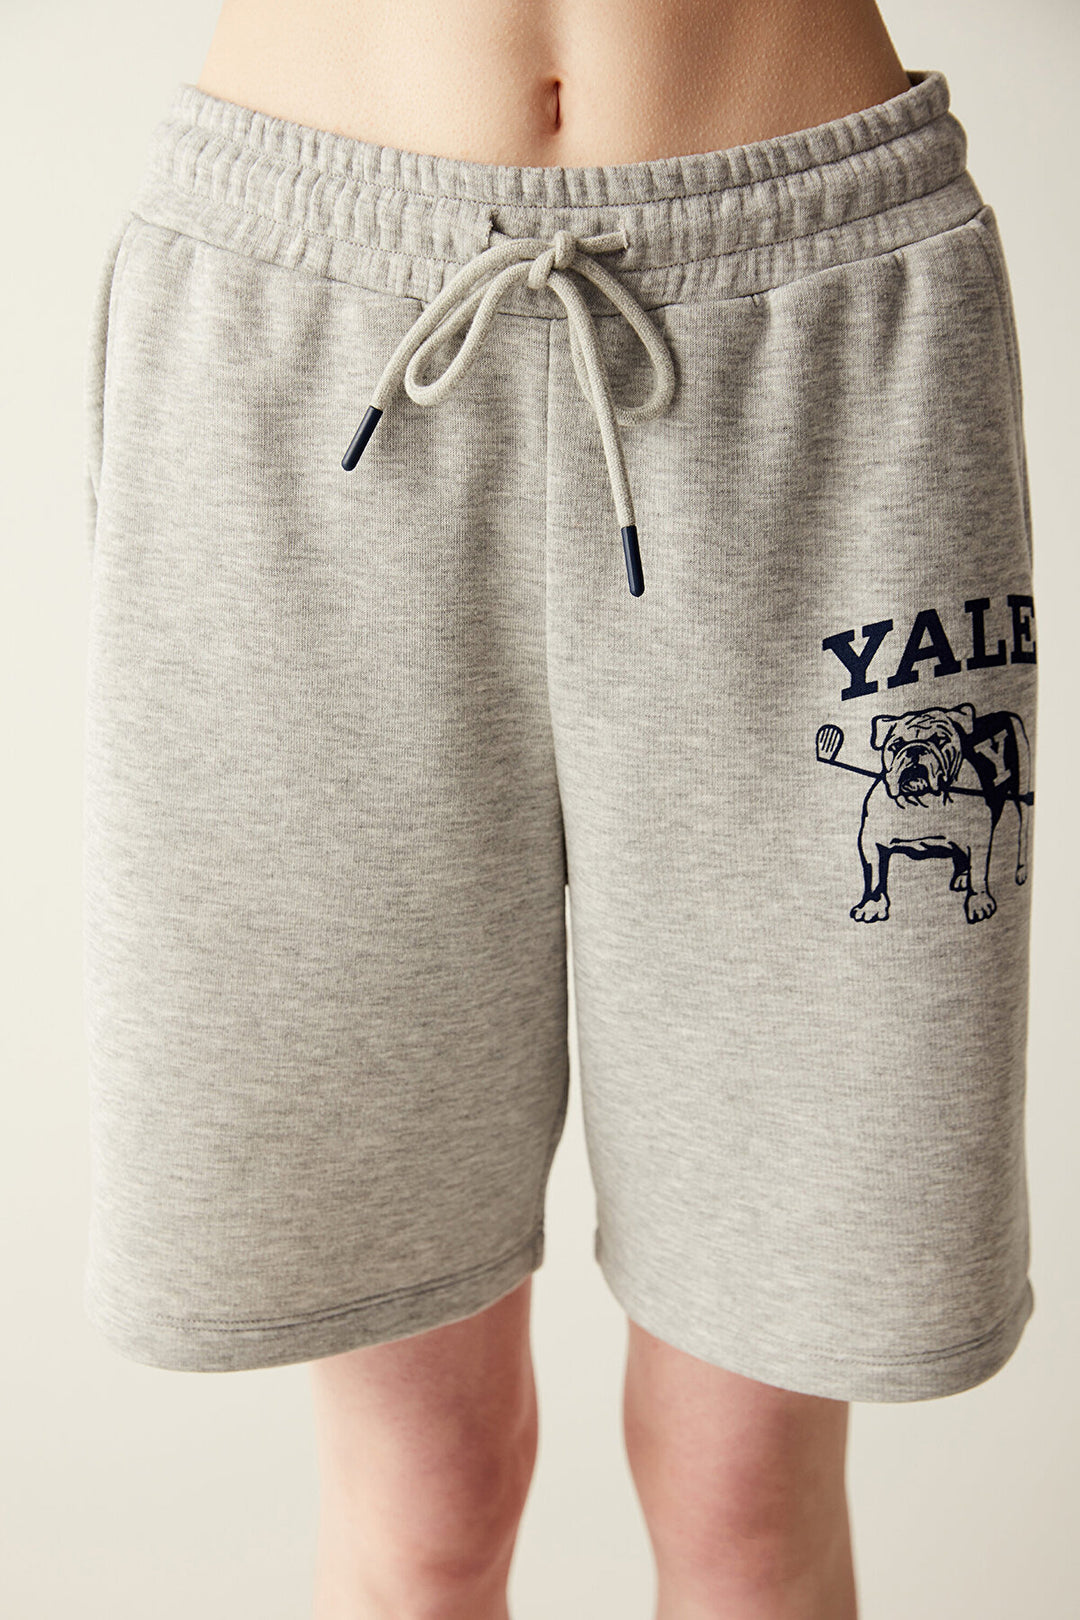 Yale Printed Grey Shorts - Unique Collection